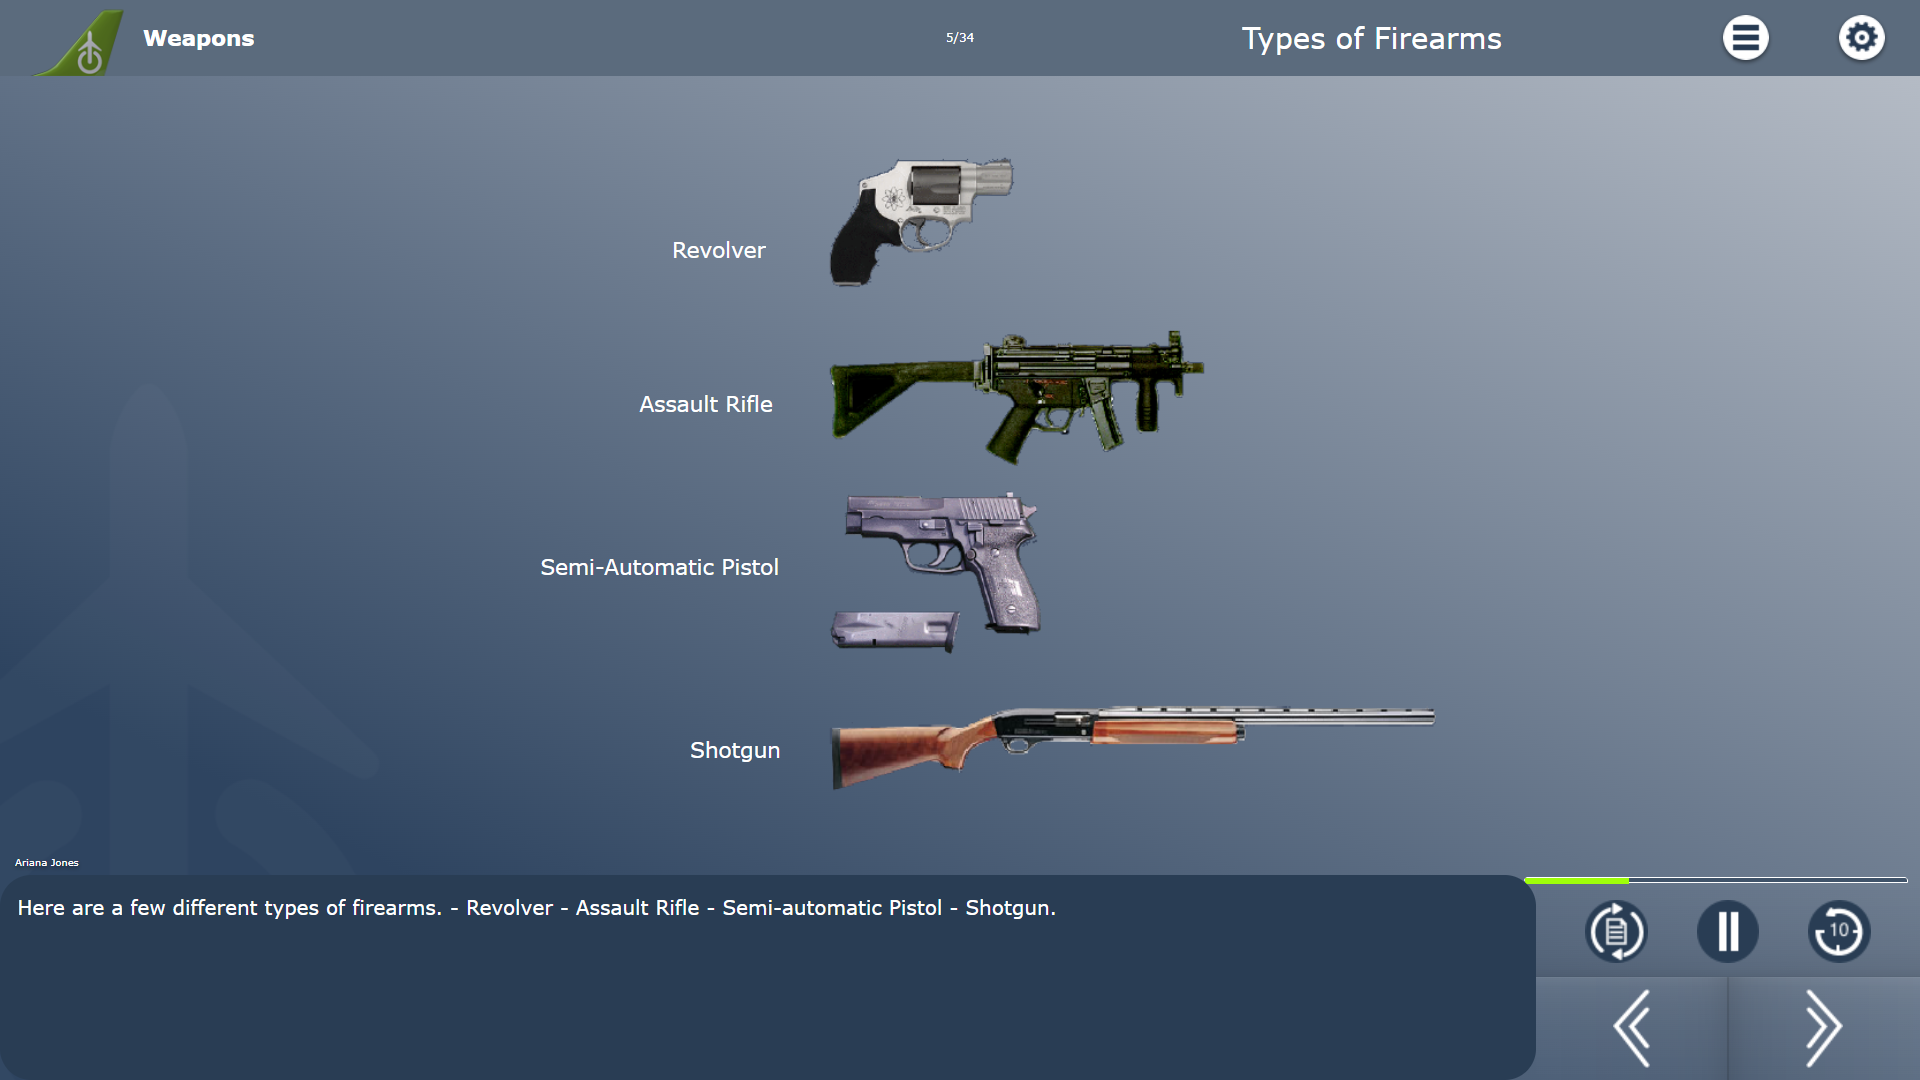 Weapons & Different types of firearms